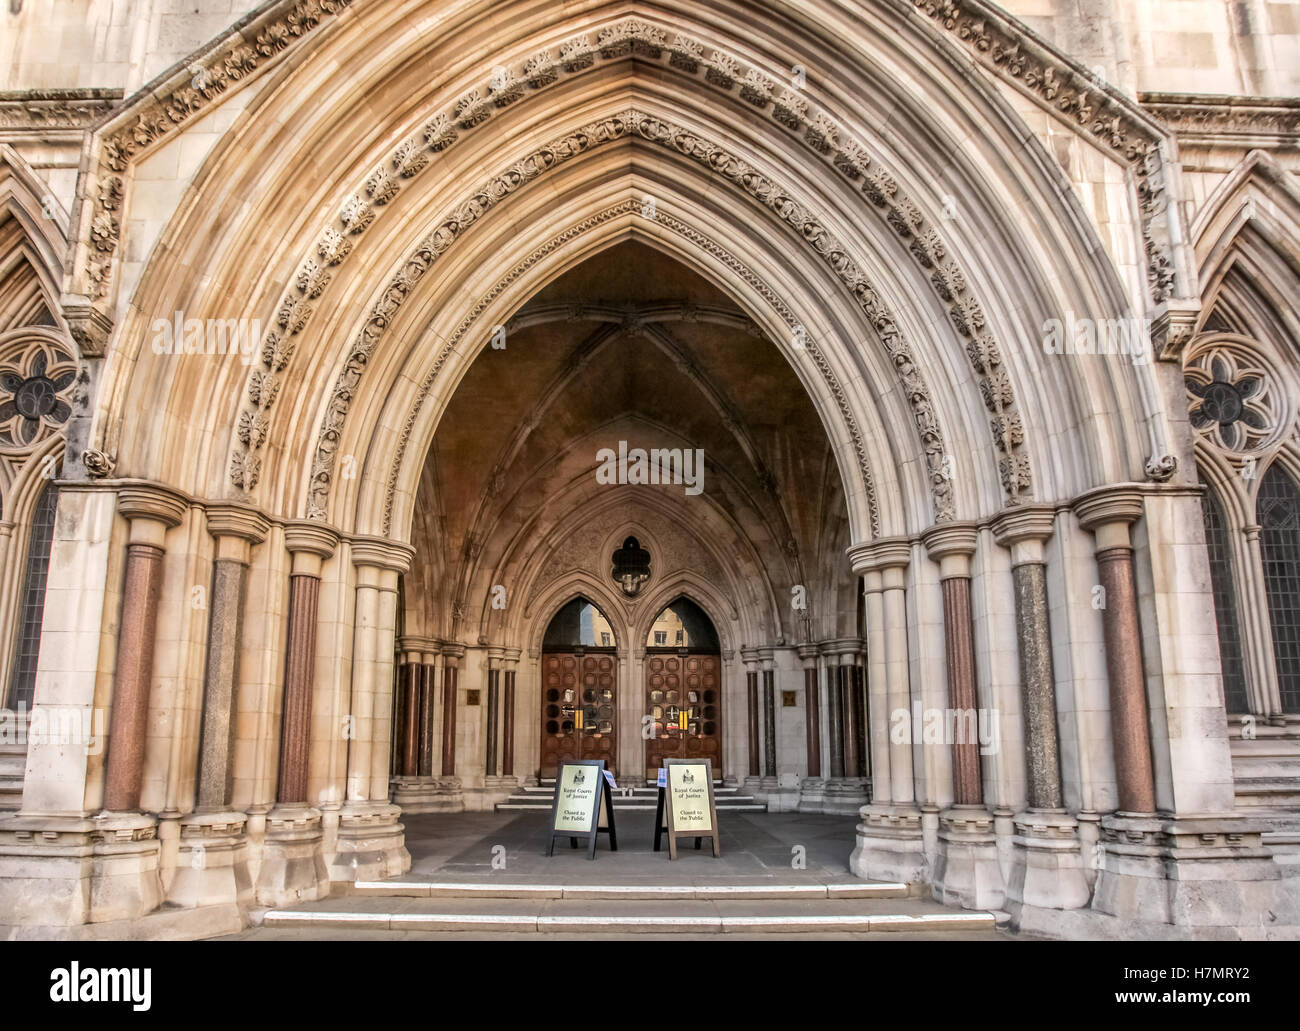 Entrance to the Royal Court of Justice, London, UK Stock Photo